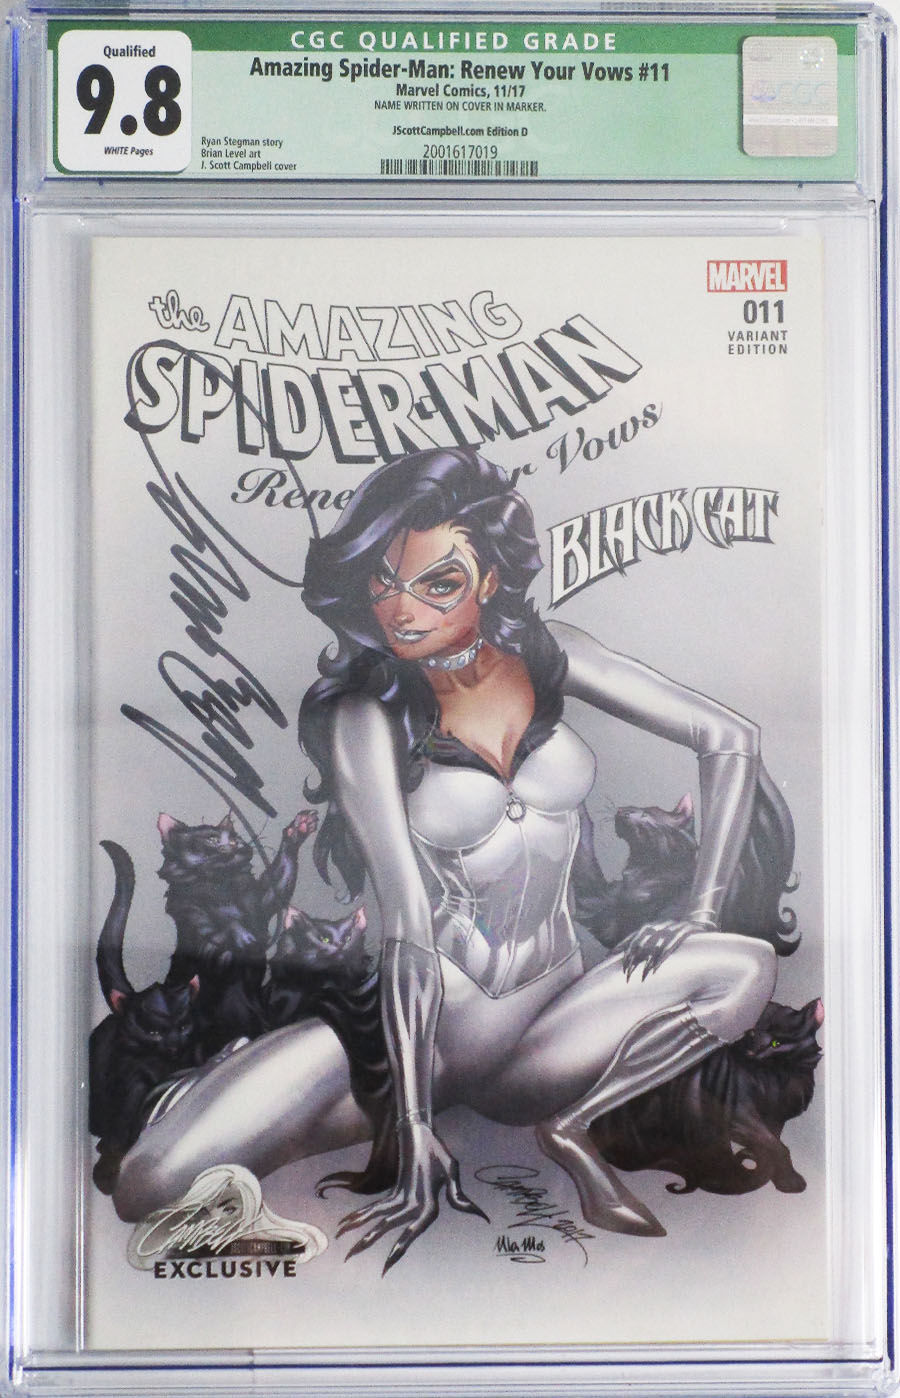 Amazing Spider-Man Renew Your Vows Vol 2 #11 Cover B CGC Qualified 9.8 J Scott Campbell Variant Cover Signed by J Scott Campbell 